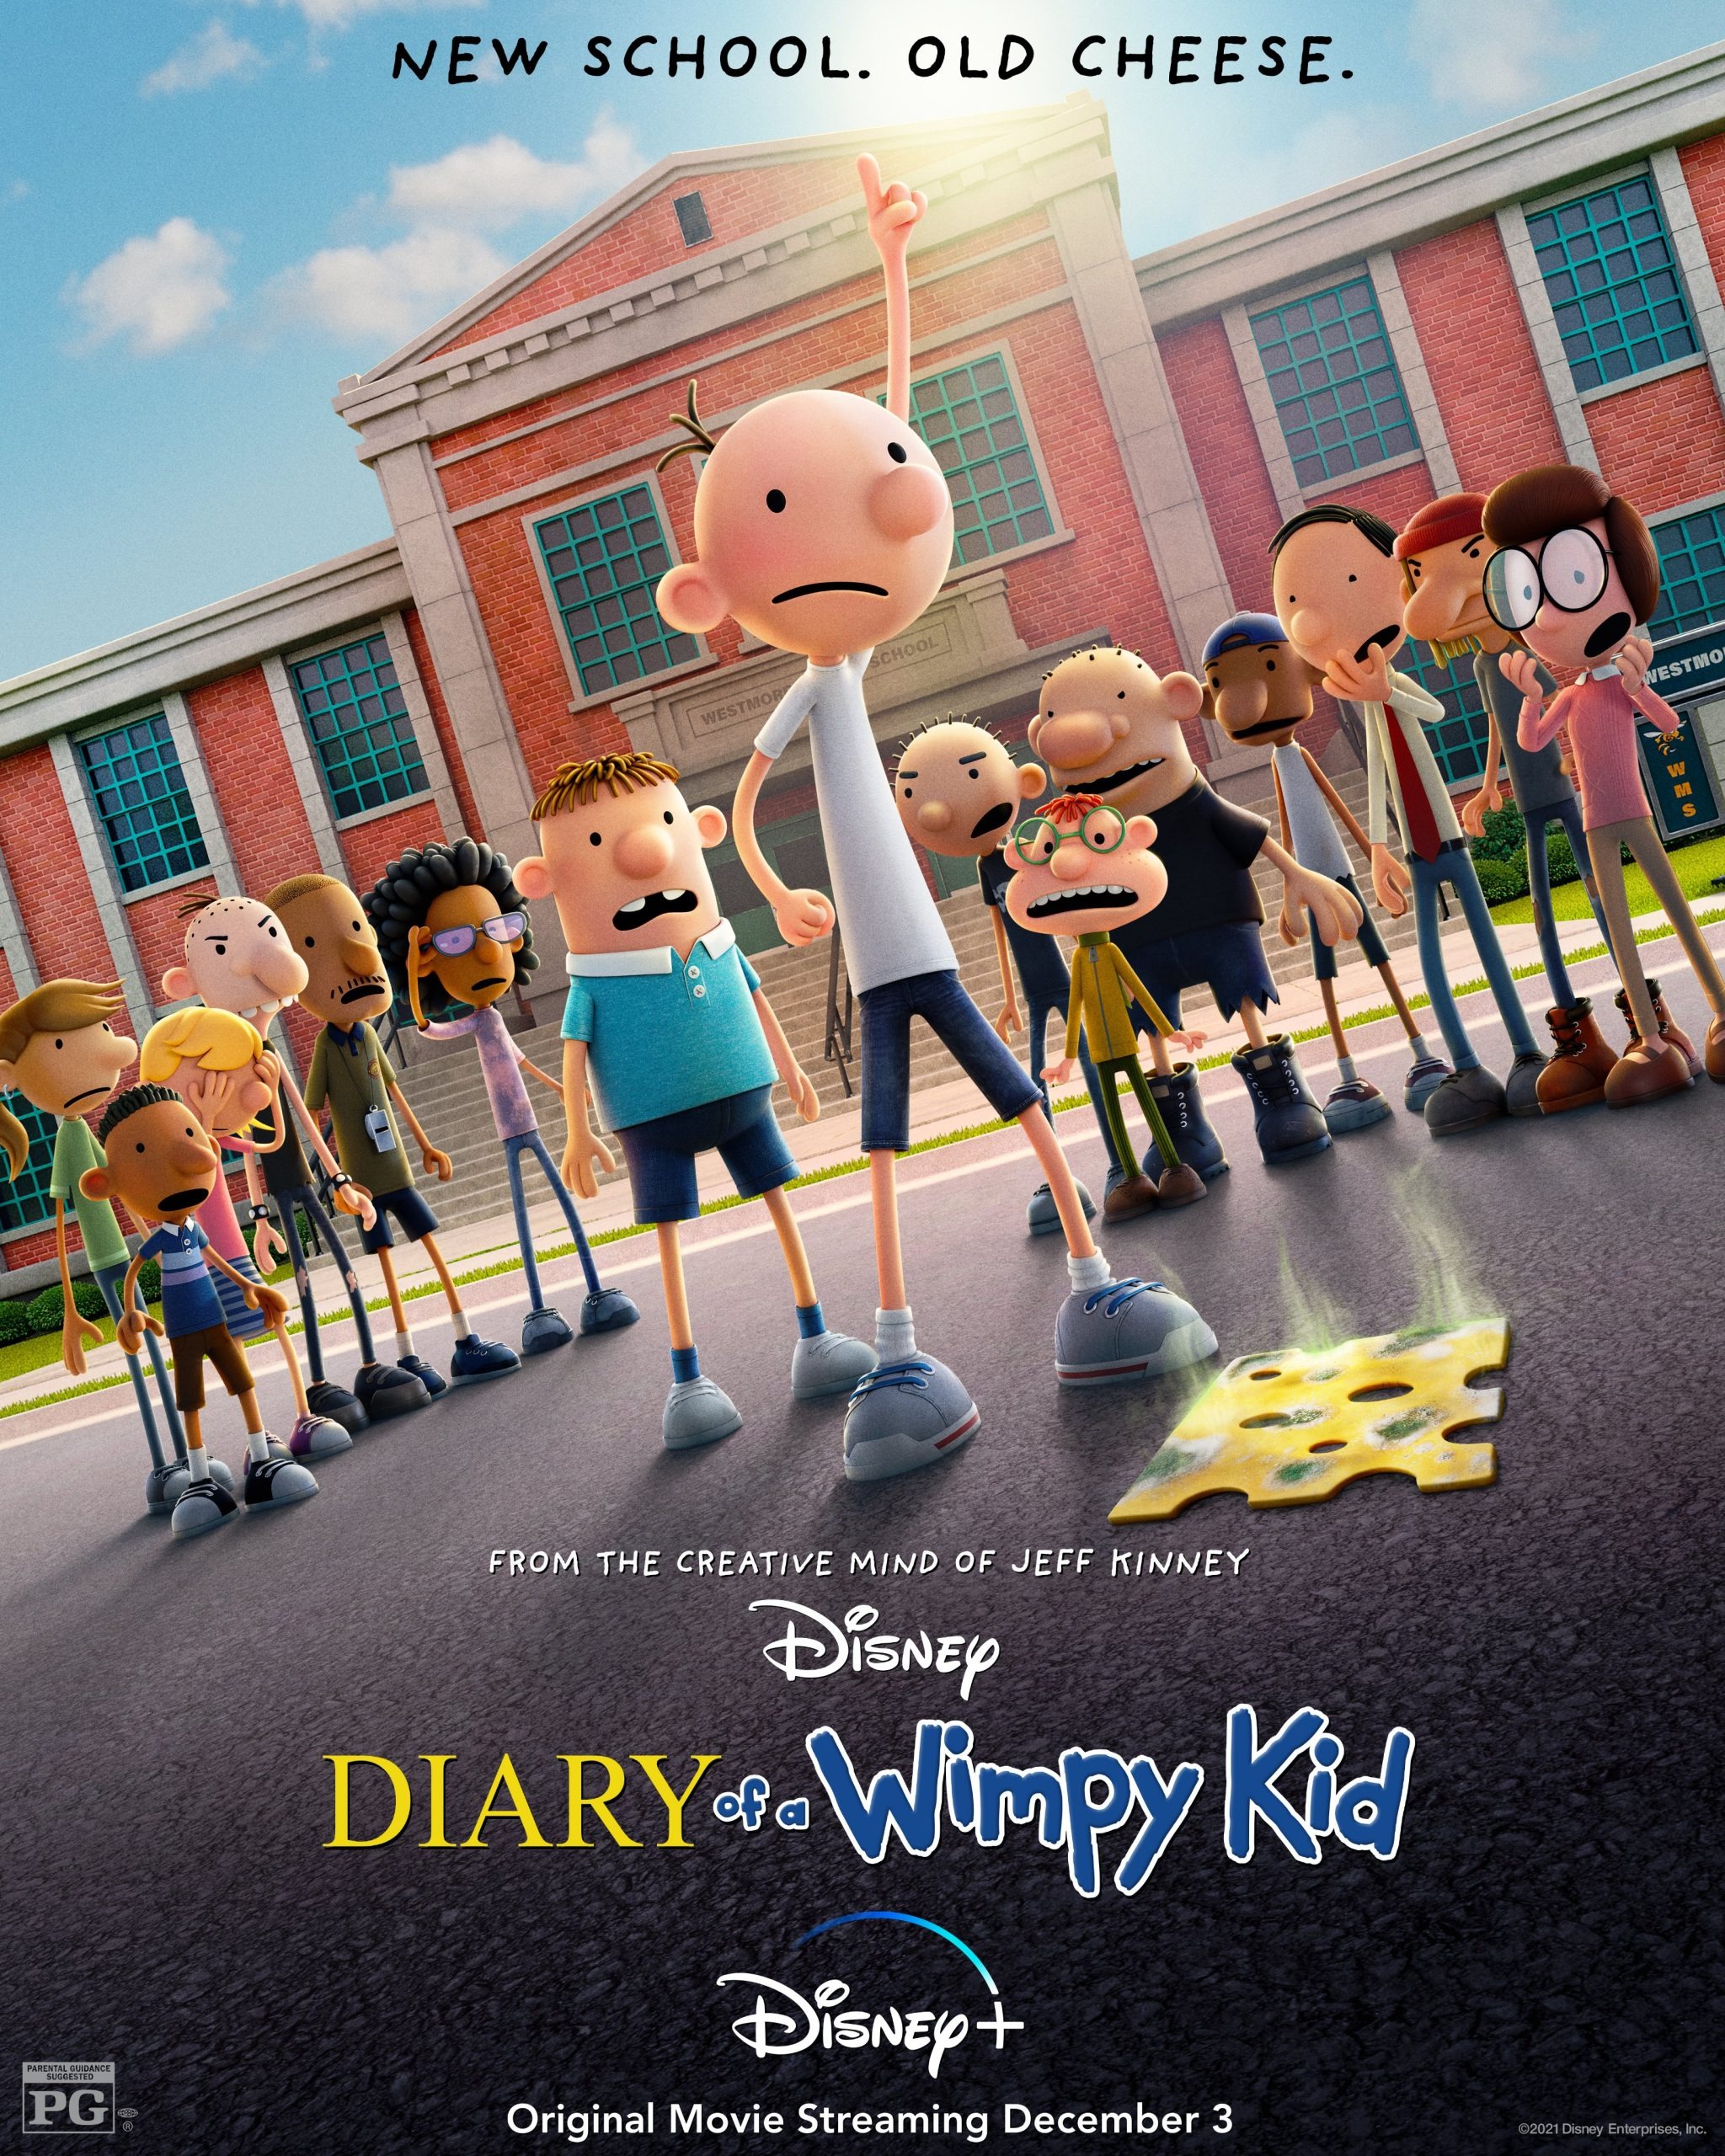 Mega Sized Movie Poster Image for Diary of a Wimpy Kid (#2 of 2)